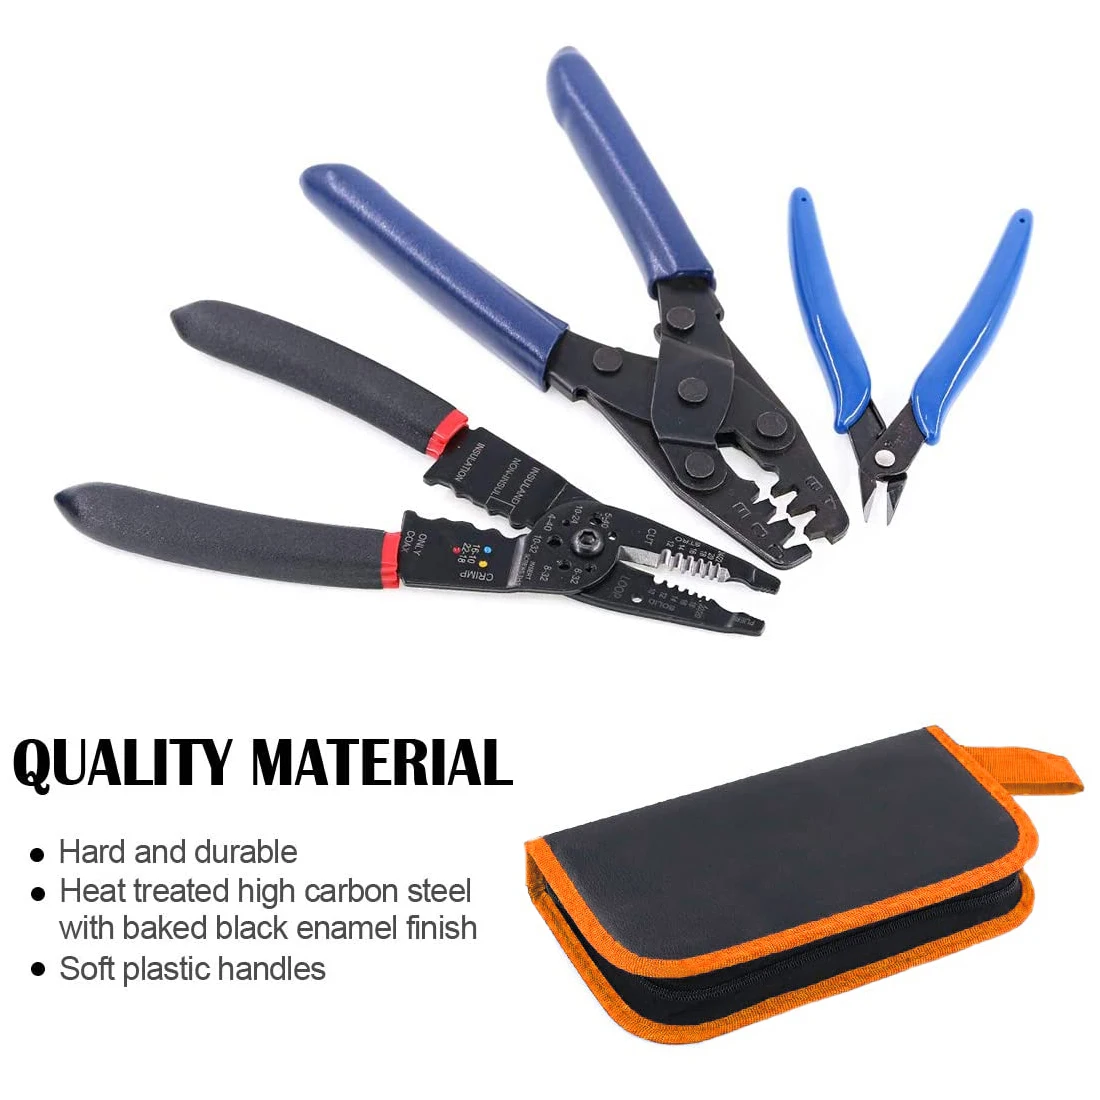 3Pcs Wiring Harness Terminal Plug Crimping Tool DR-1 Crimper Plier With Multifunction Wire Stripper and Cutter Crimp Open Barrel